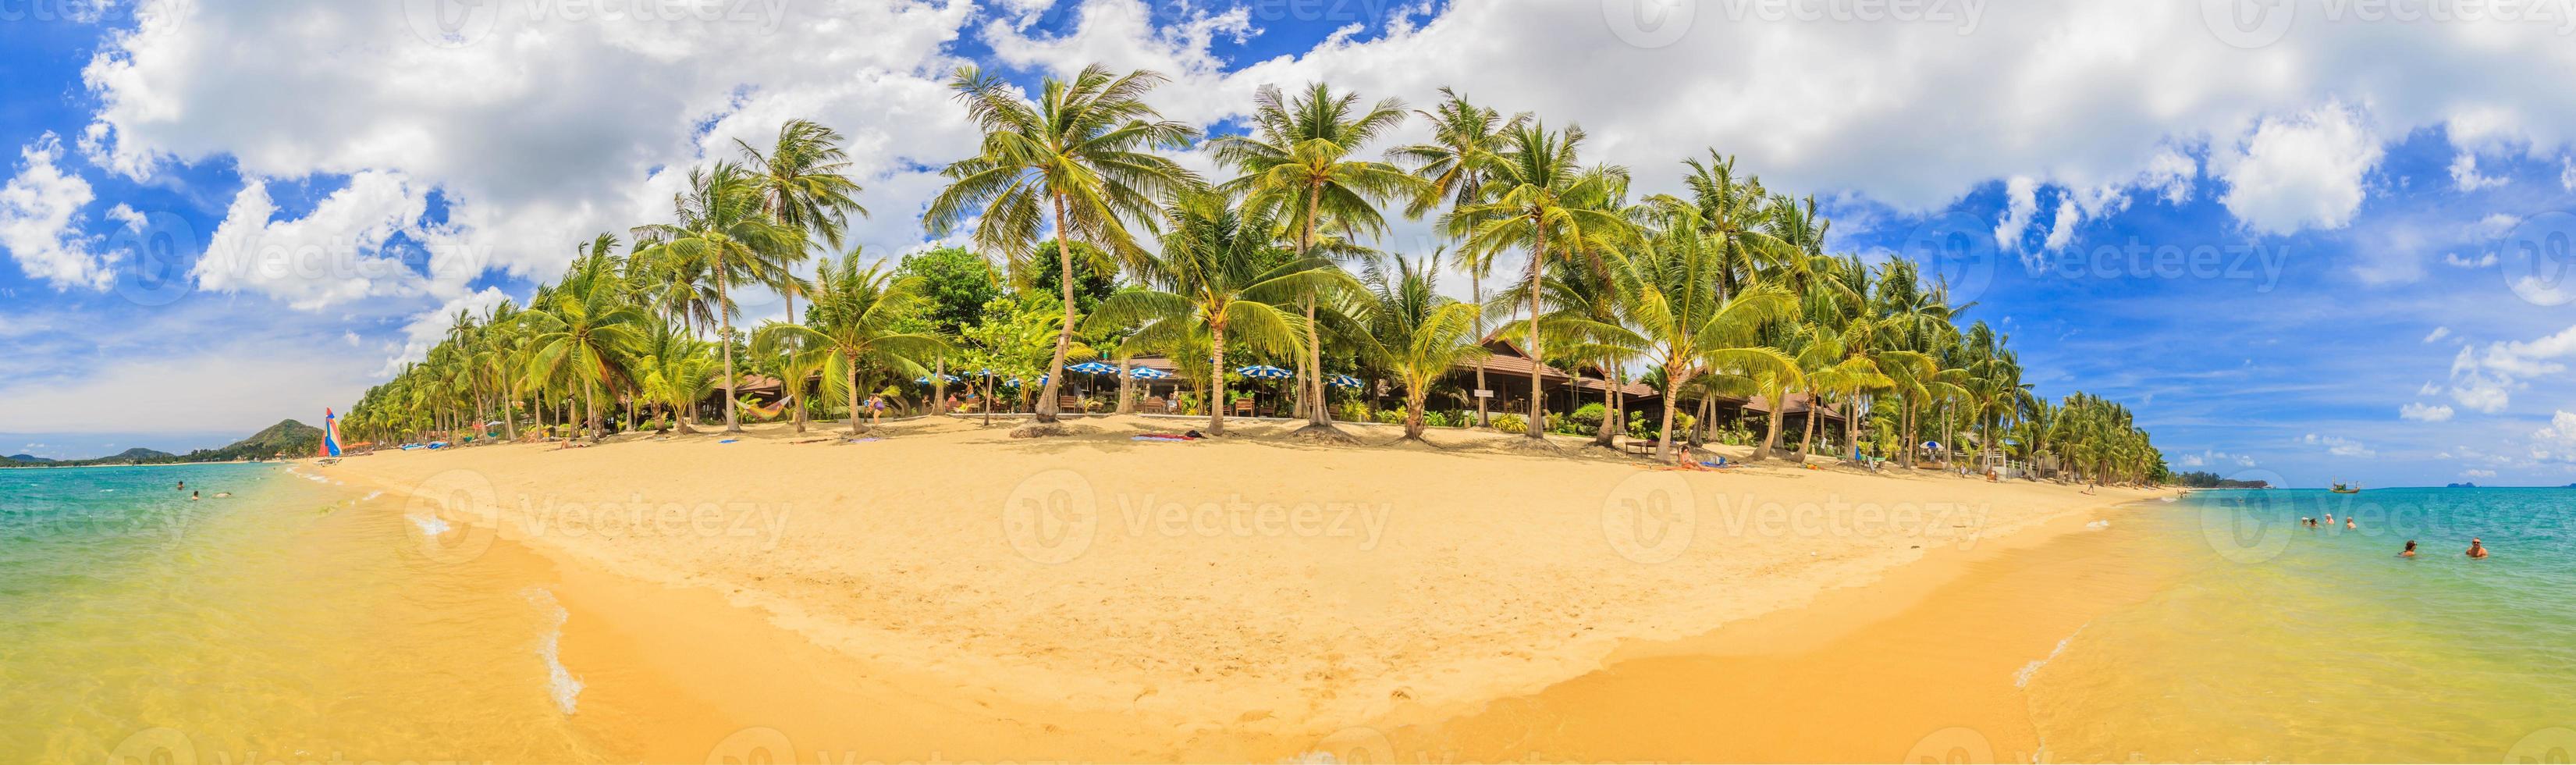 Panoramic picture of a beach in Thailand during daytime photo